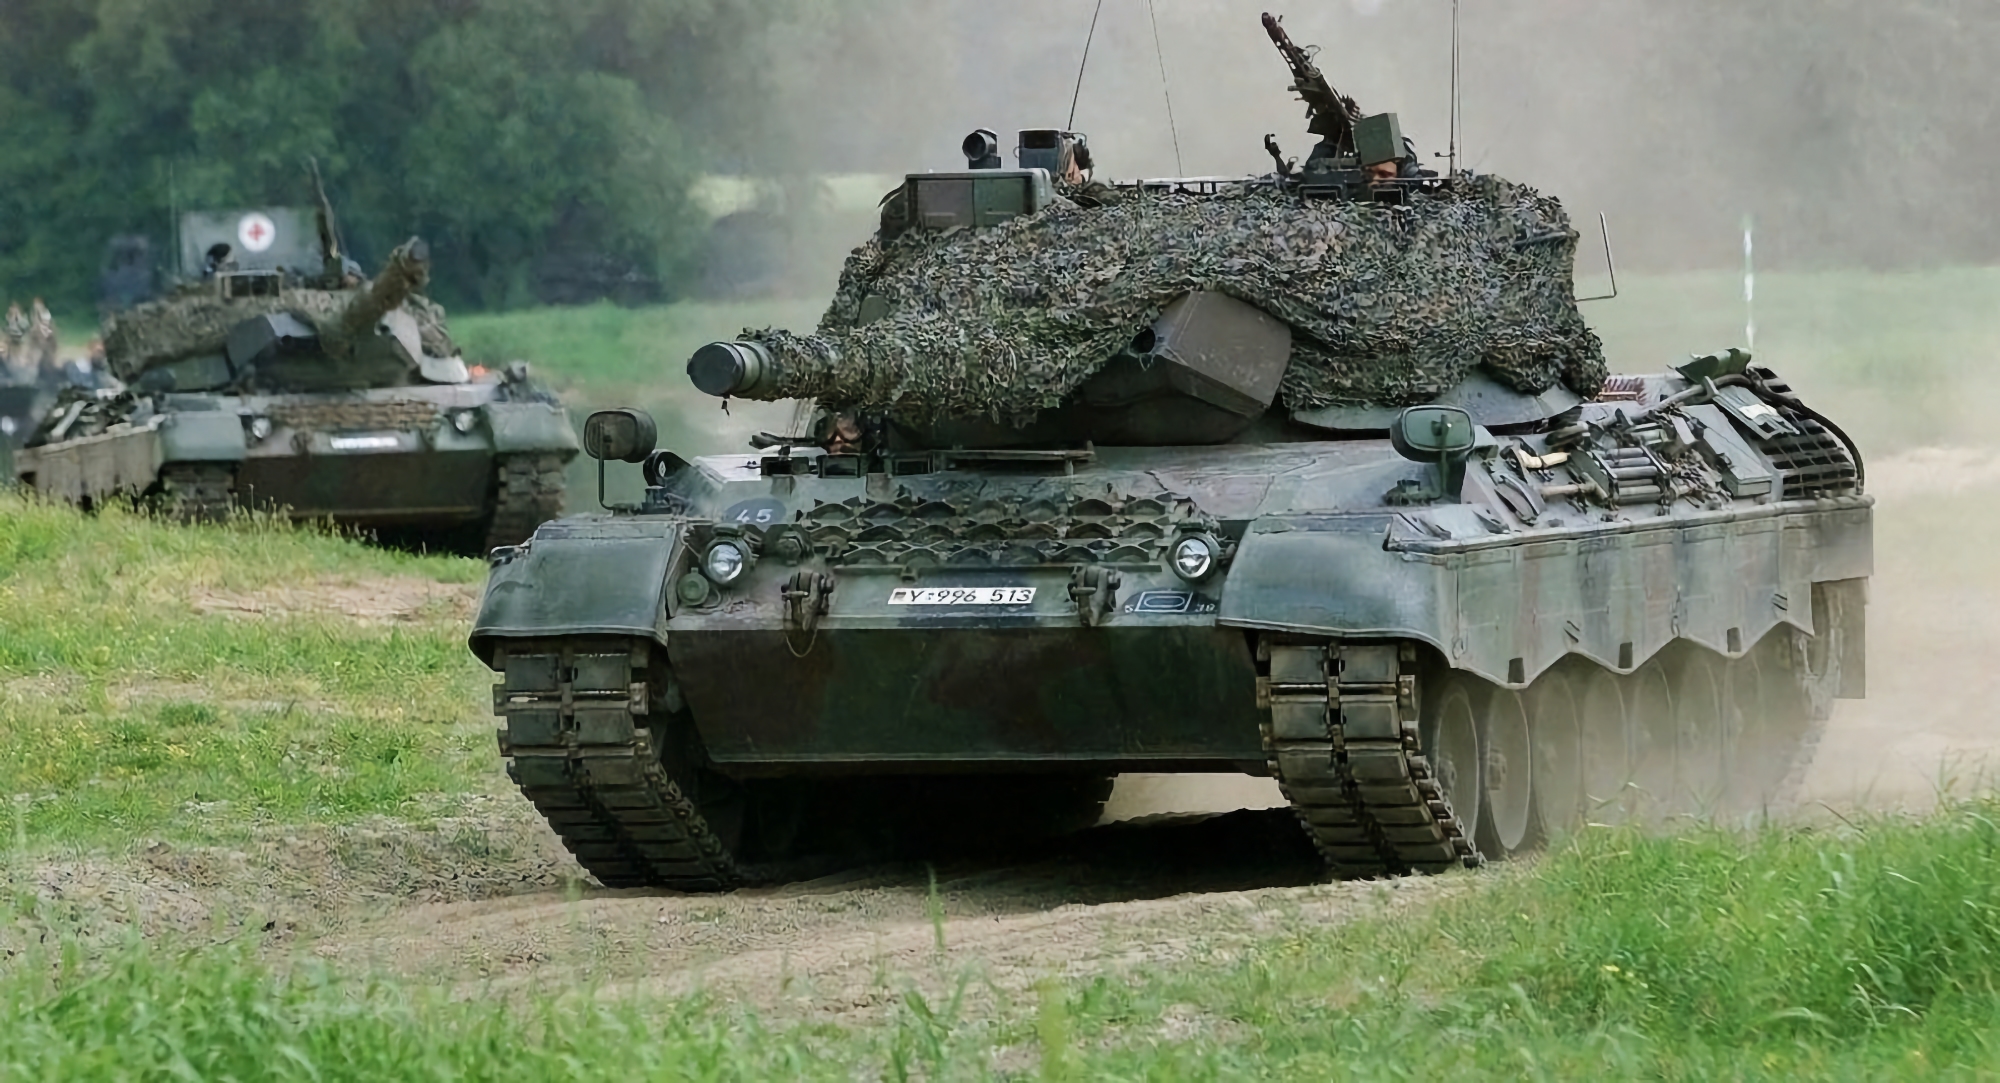 De Standaard: an unknown country bought 50 Leopard 1 tanks from Belgium and has already shipped them to Ukraine